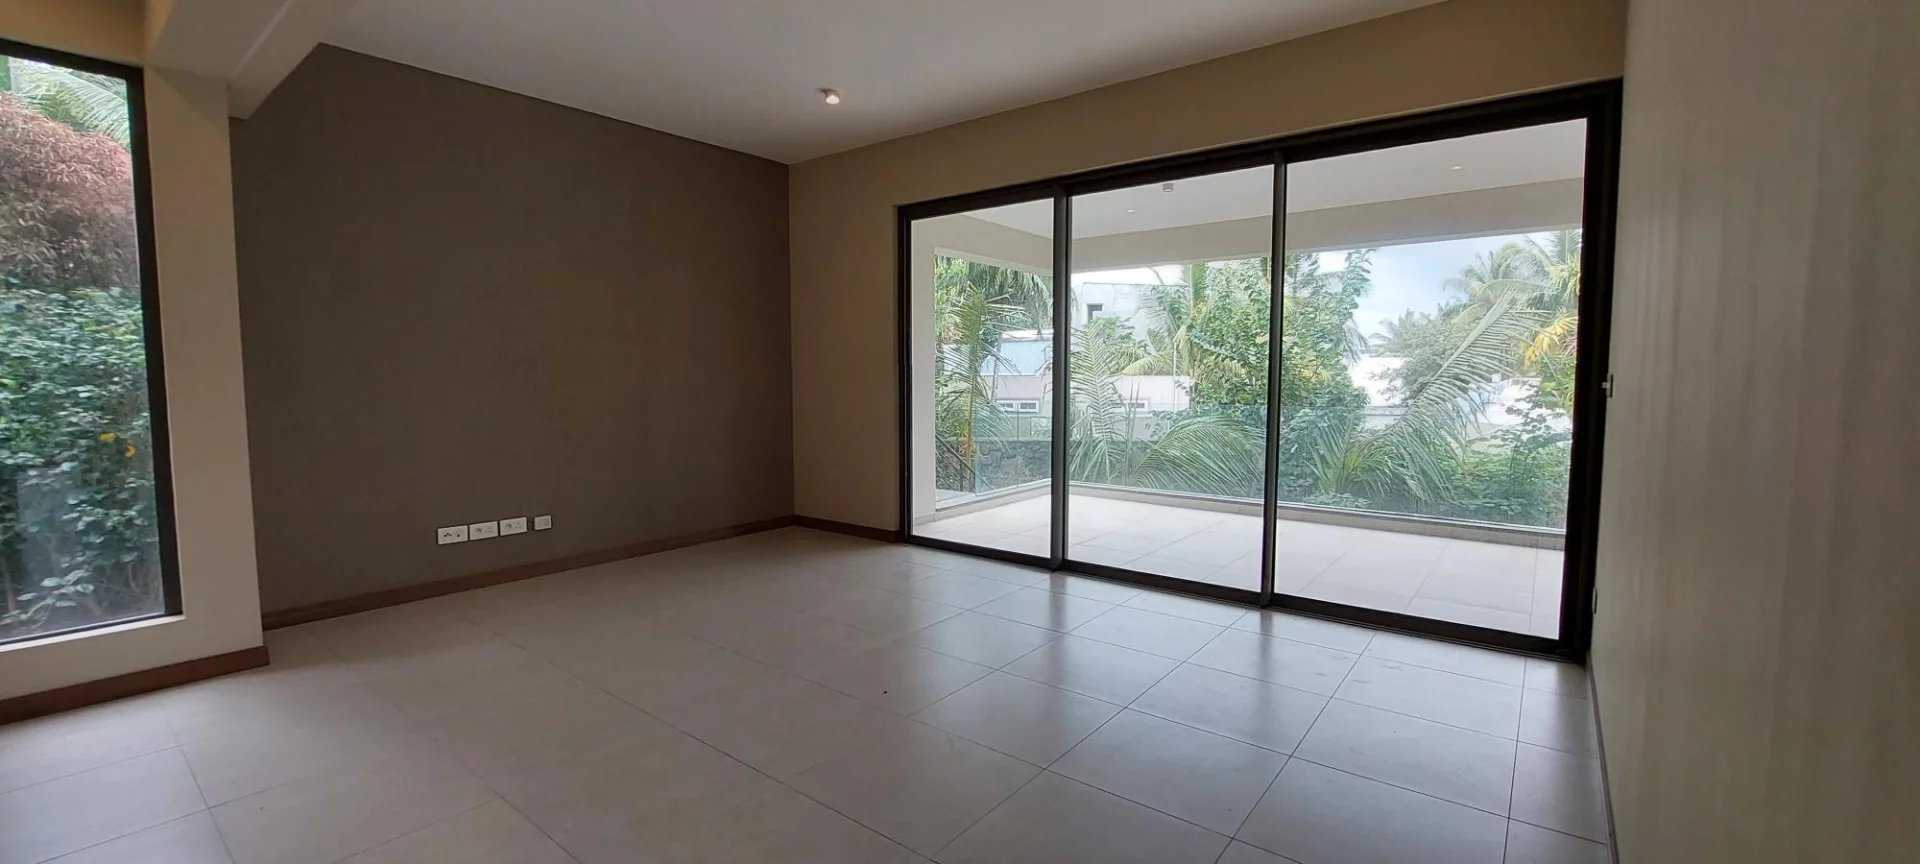 Piso Grand Baie  -  ref 83167123 (picture 3)